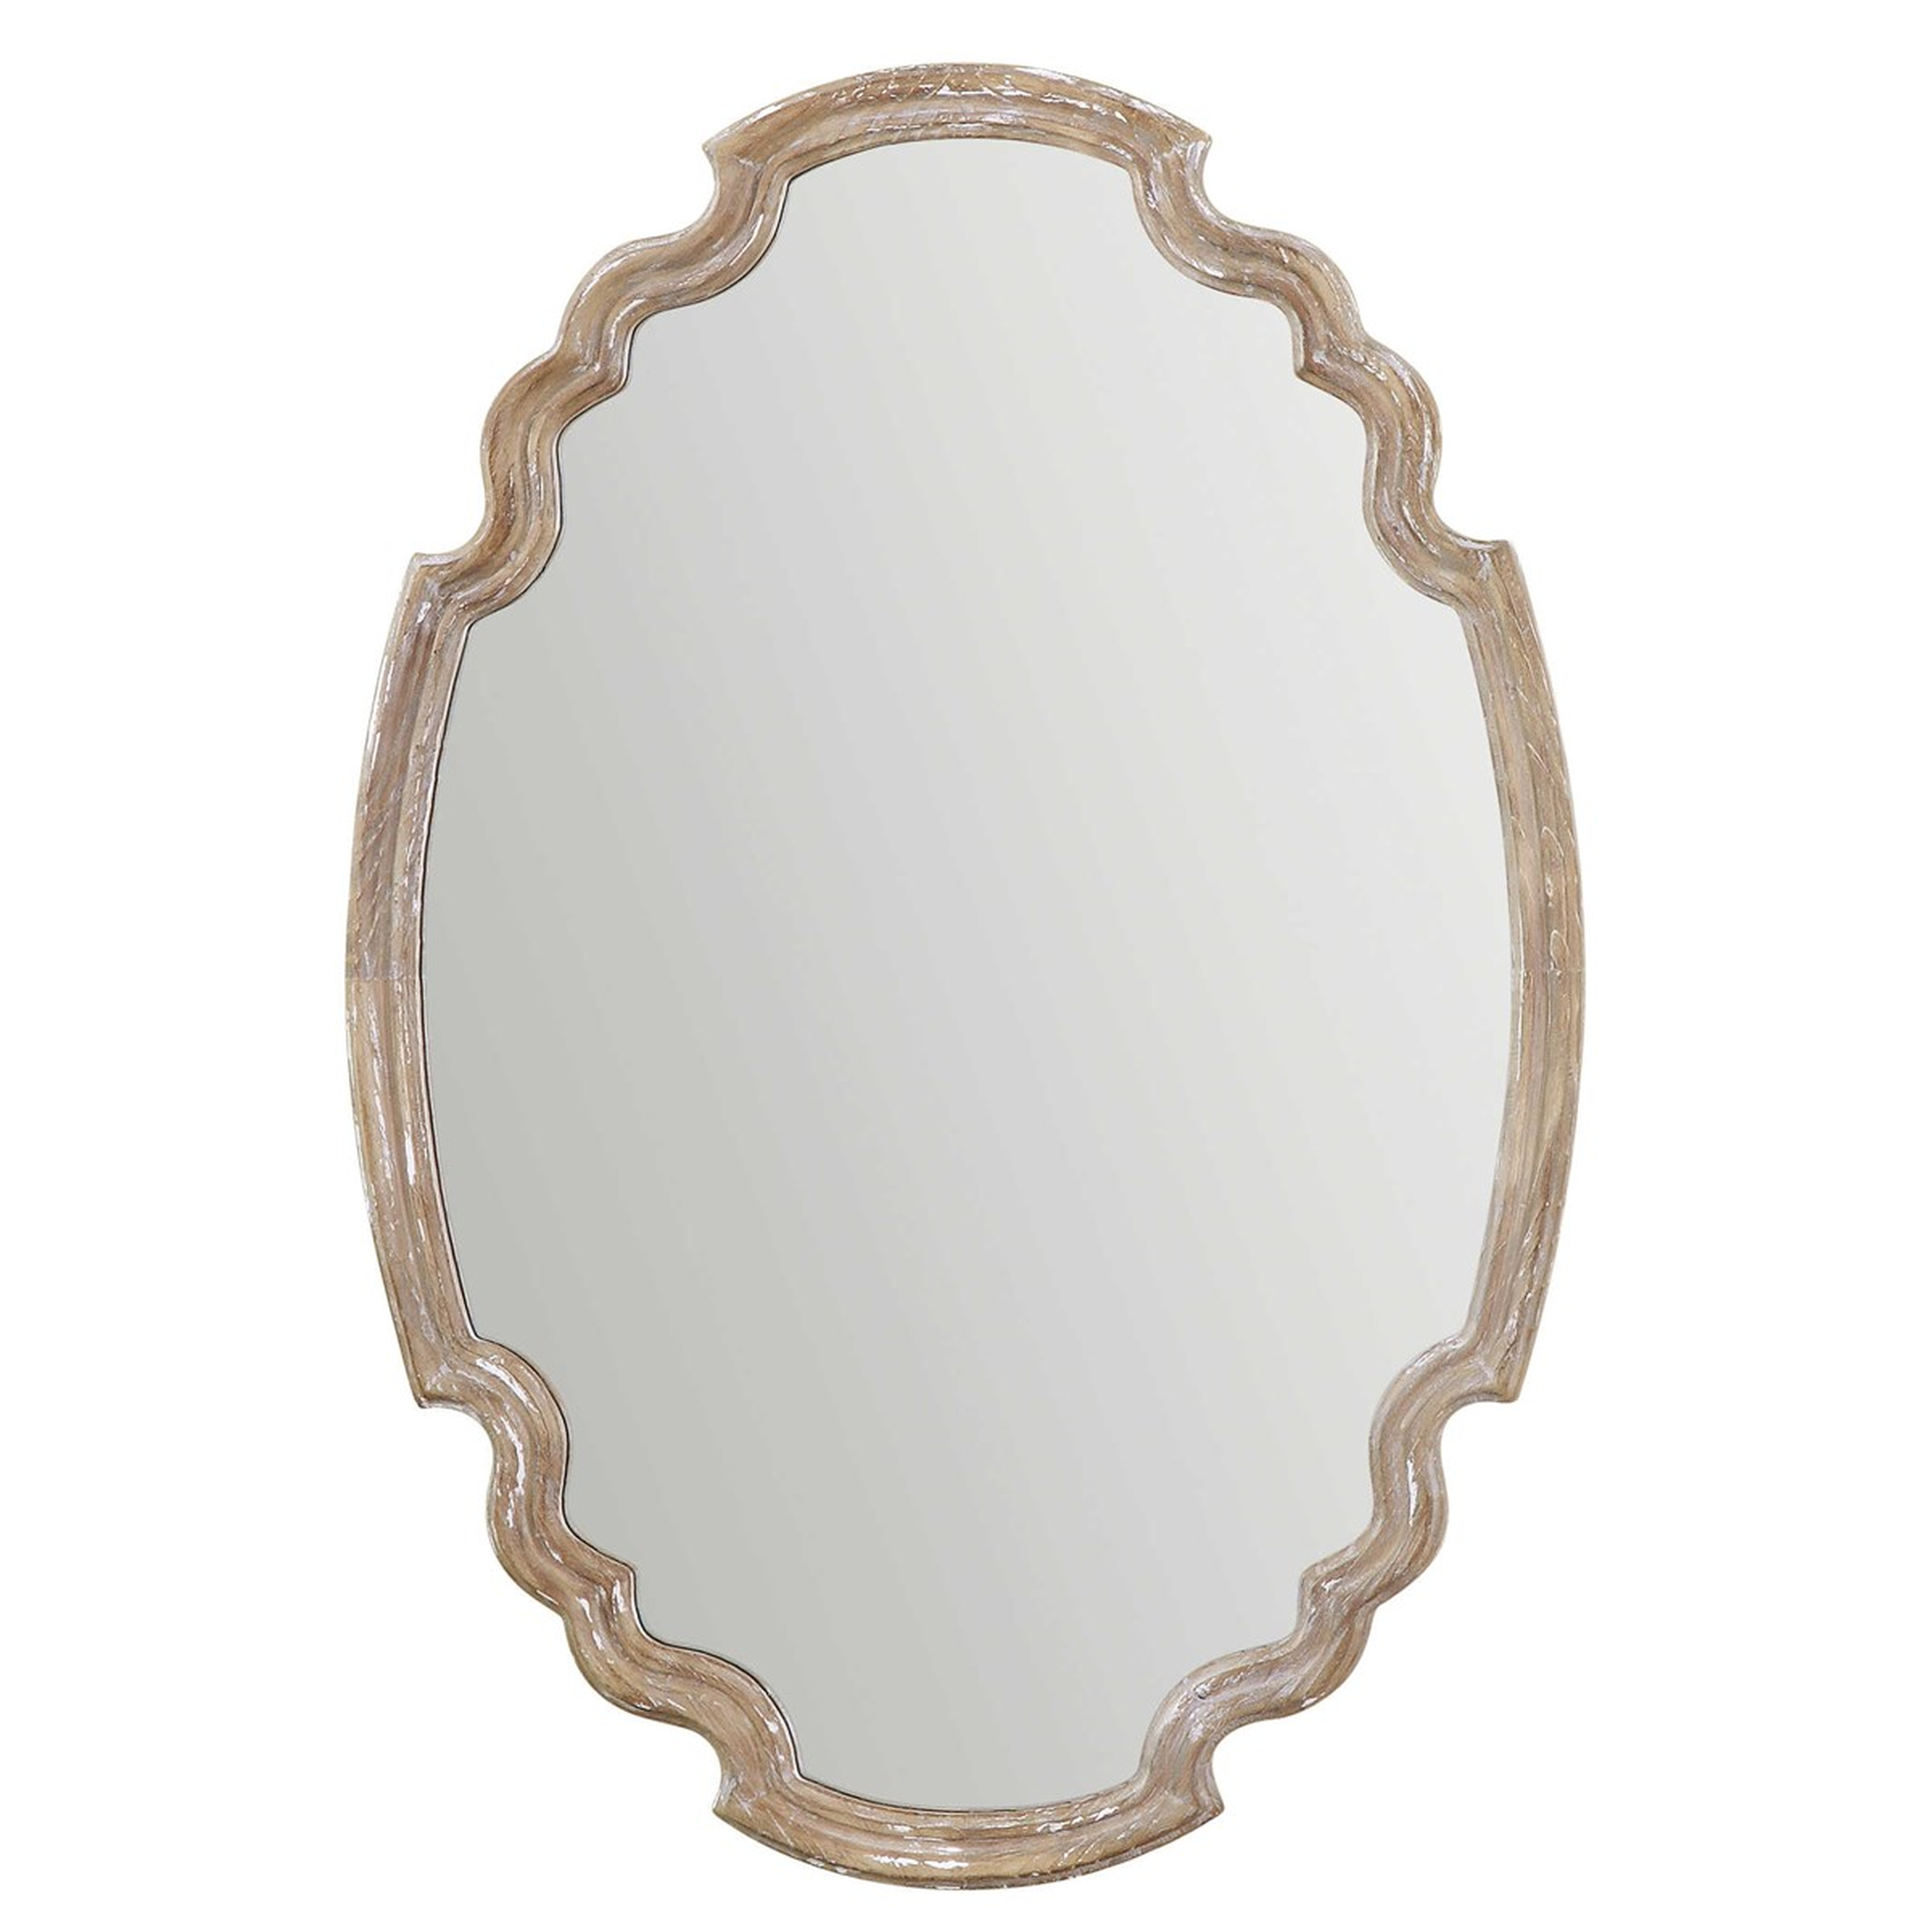 Ludovica Aged Wood Mirror - Hudsonhill Foundry